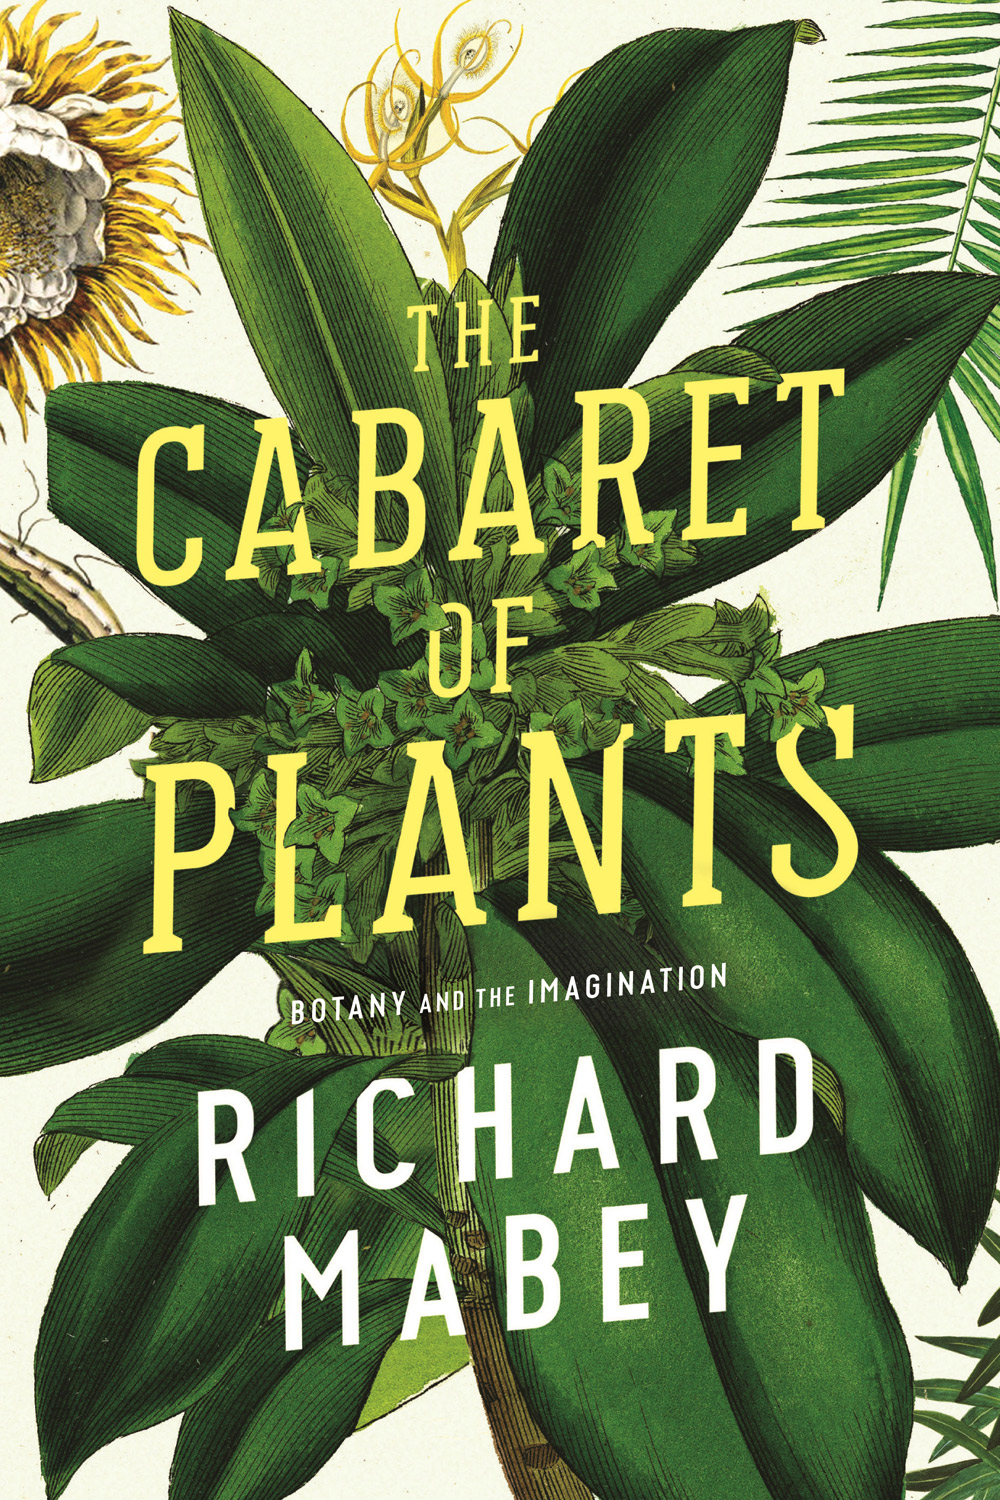 The Cabaret of Plants, by Richard Mabey, Profile Books, $39.99.